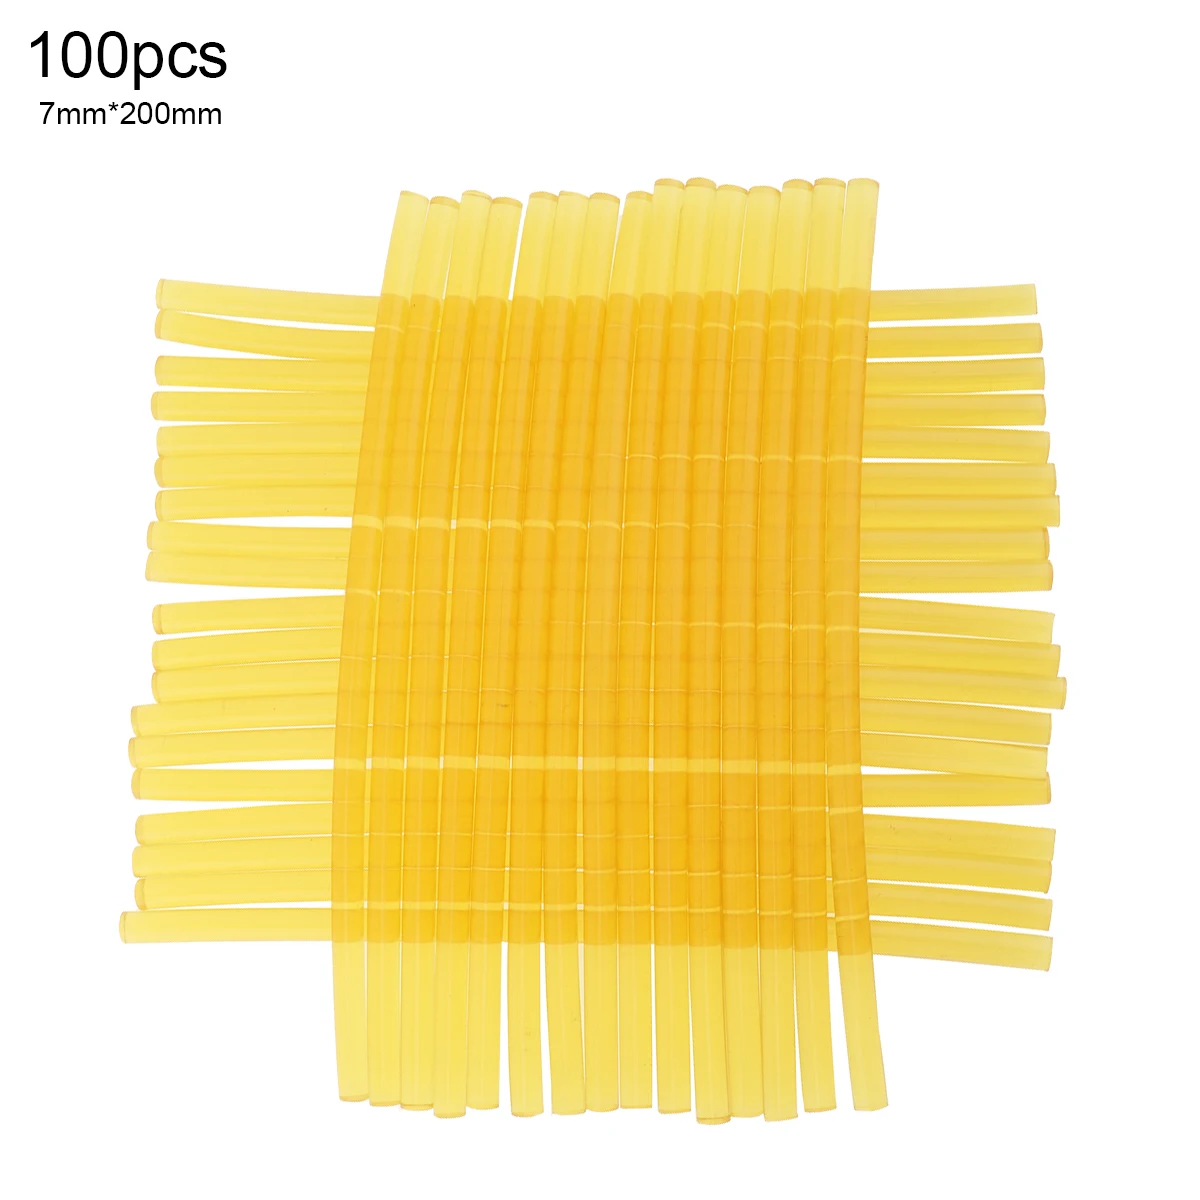 Details about   5 Pcs 270mmx11mm Clear Yellow Hot Melt Glue Adhesive Stick for Heating Gun 